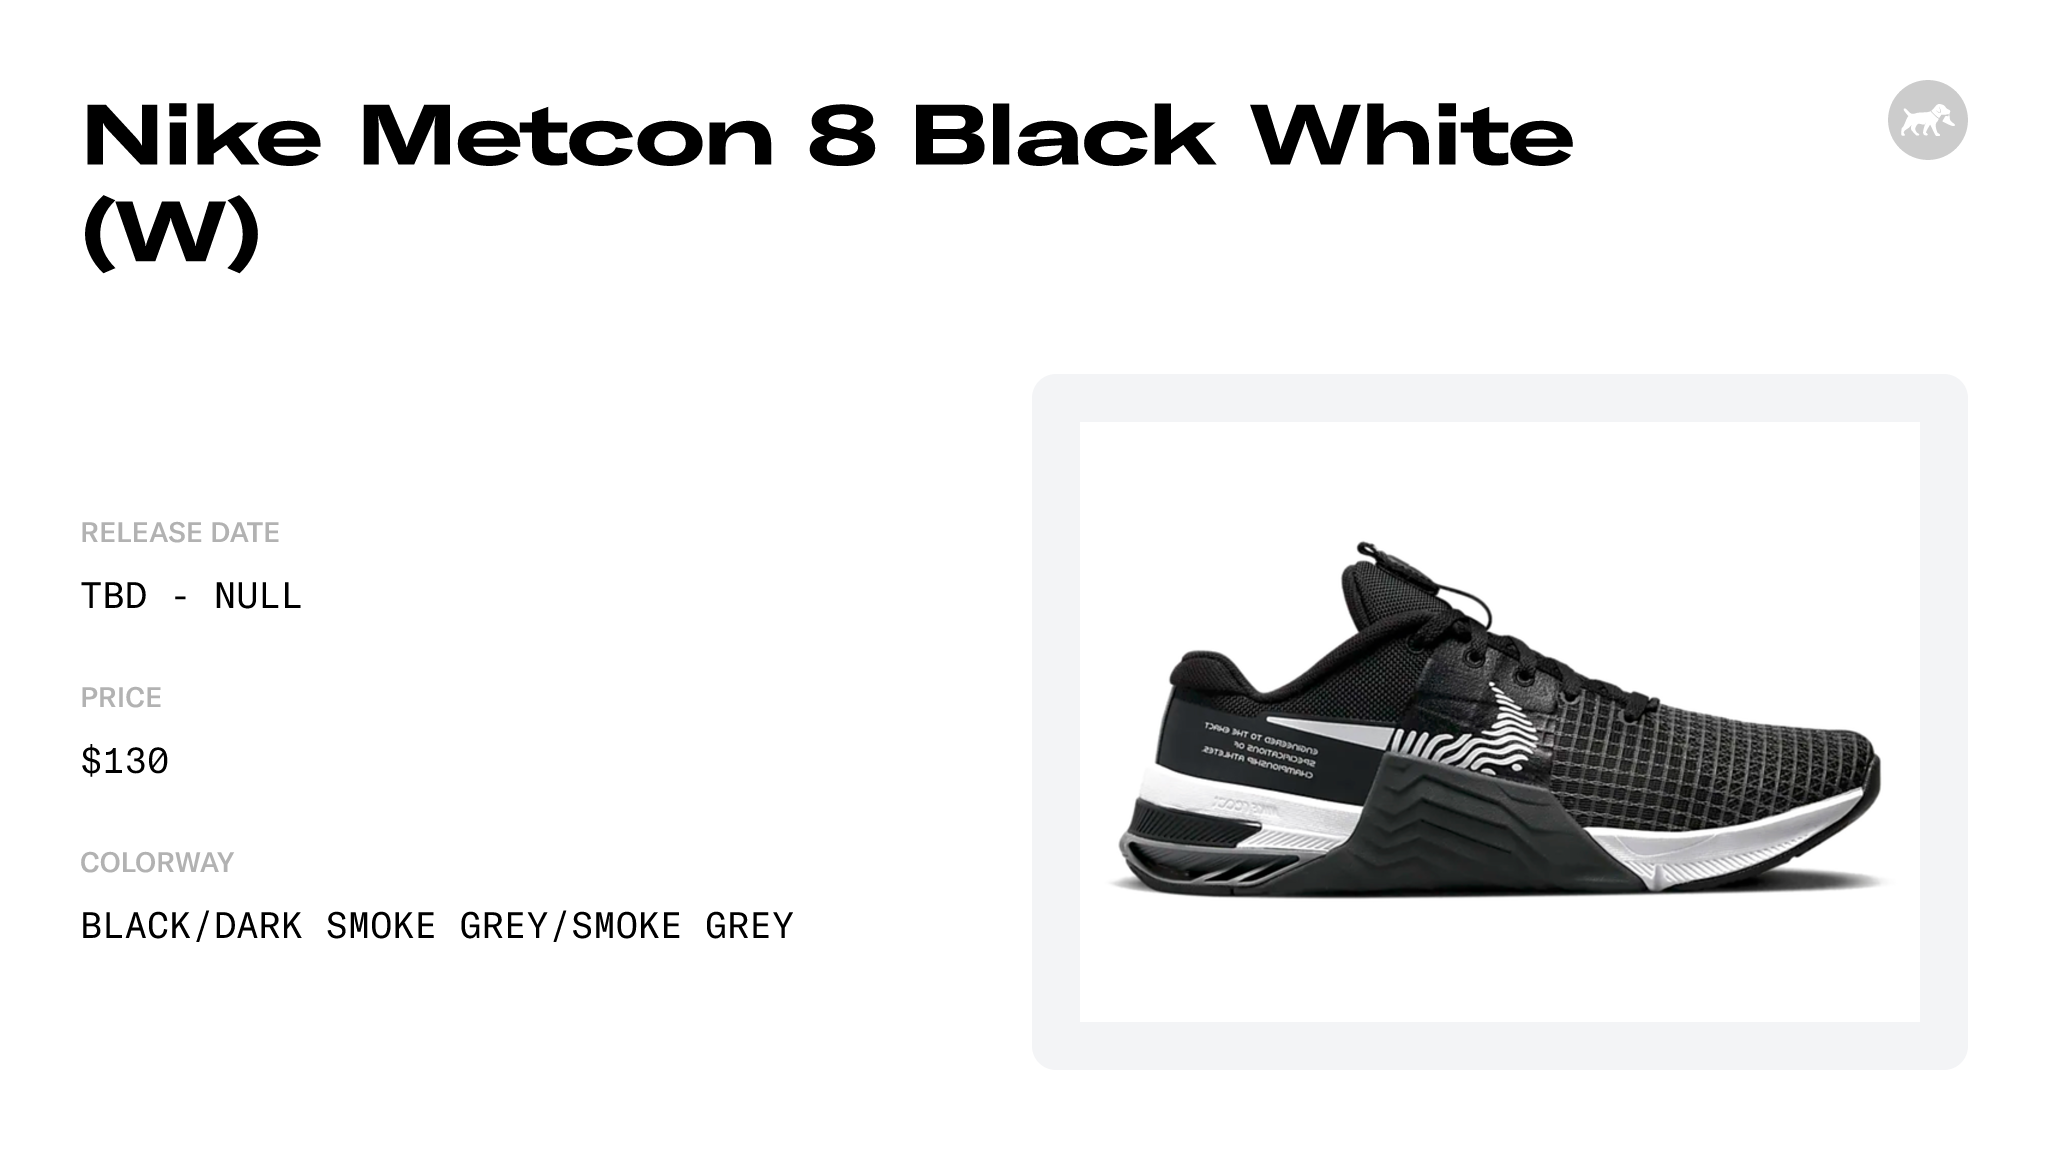 Nike Metcon 8 Black White (W) - DO9327-001 Raffles and Release Date